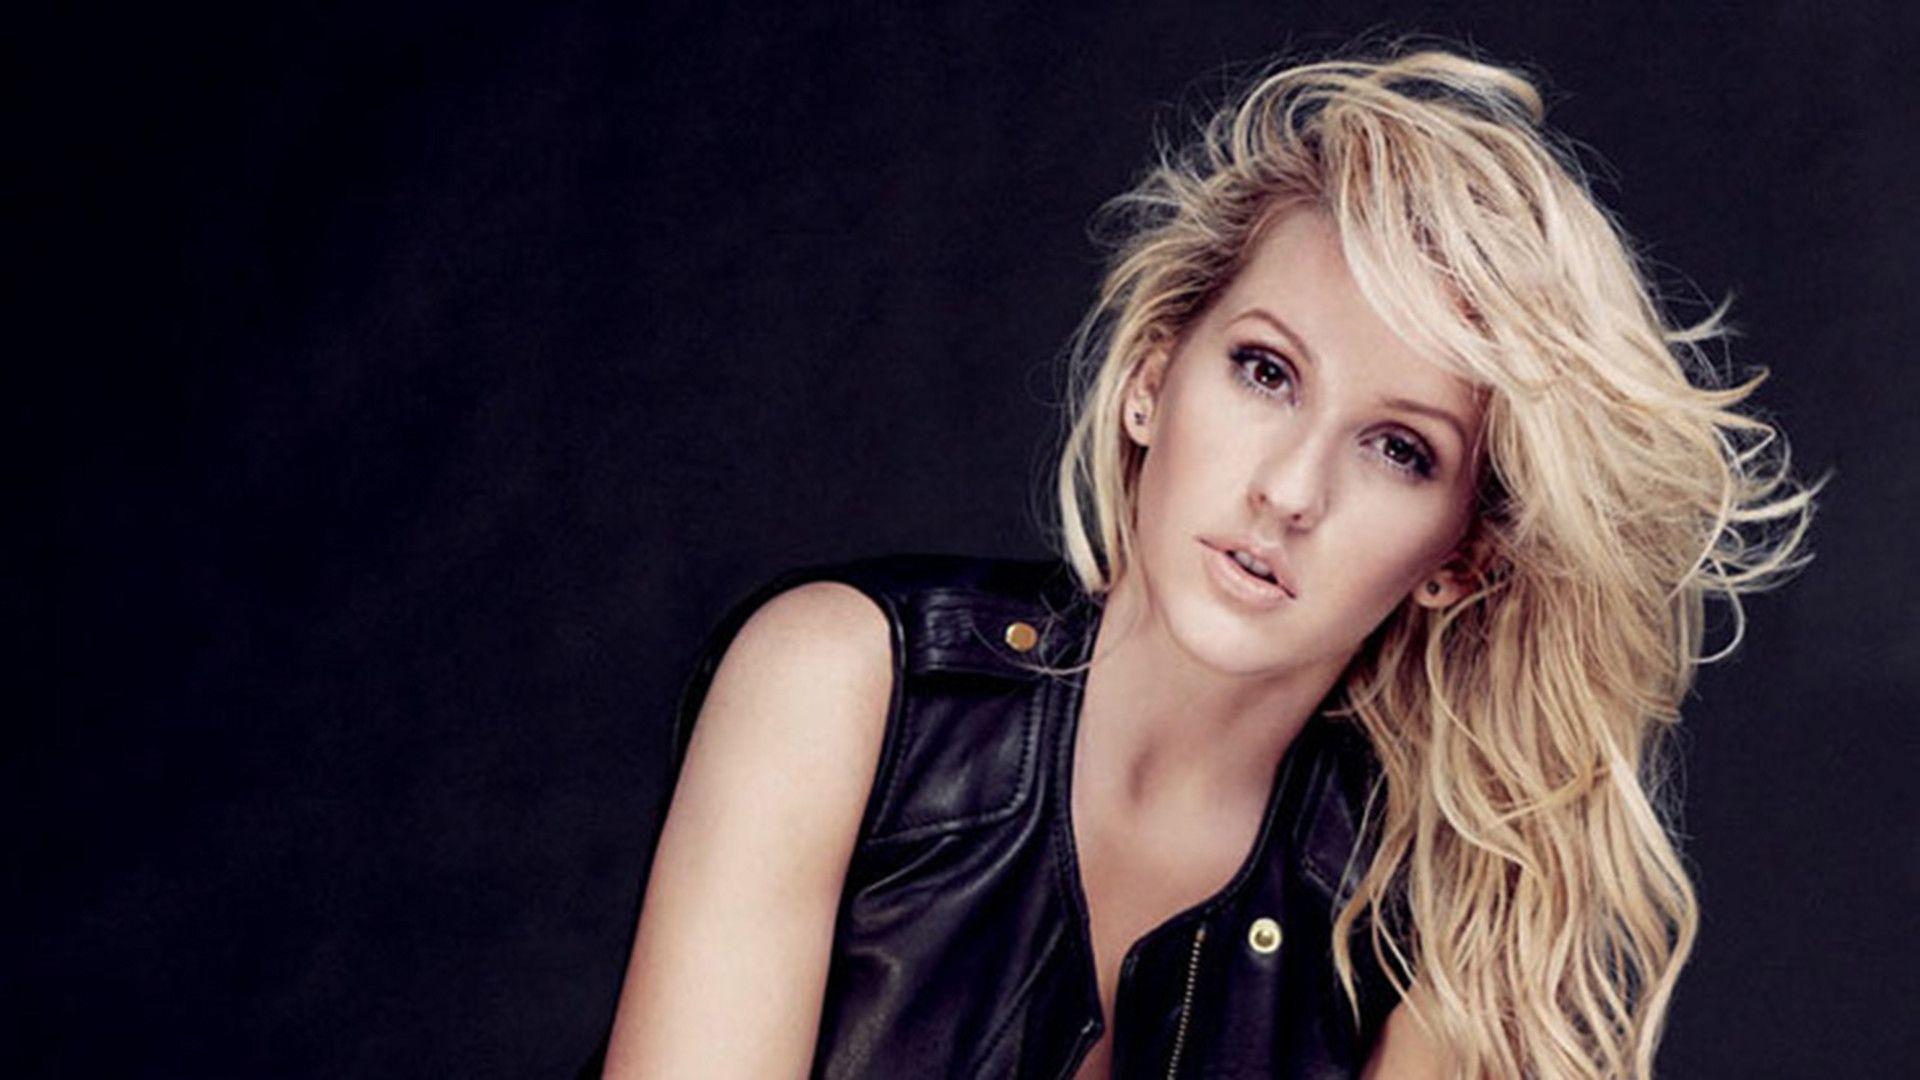 Free download Ellie Goulding Wallpaper 1920x1200 Wallpapers 1920x1200  Wallpapers [1920x1200] for your Desktop, Mobile & Tablet | Explore 40+ Ellie  Goulding Wallpaper HD | Ellie Goulding Wallpaper, Ellie Goulding Wallpapers,  Ellie Goulding Background